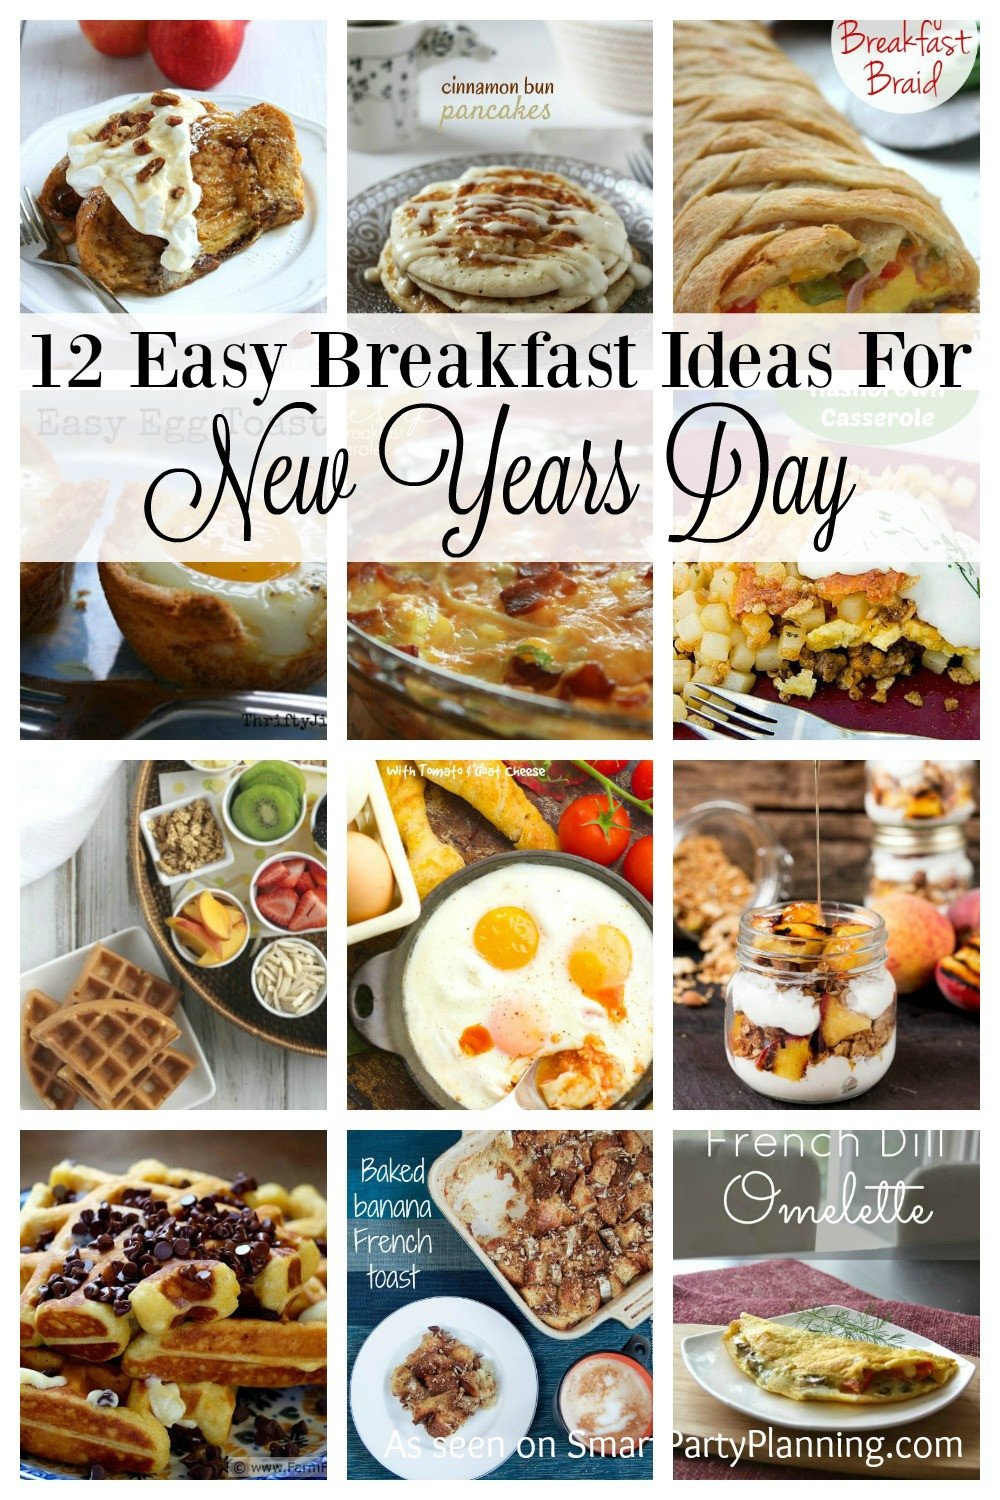 Breakfast Brunch Recipes
 12 Easy Breakfast Recipes For New Years Day